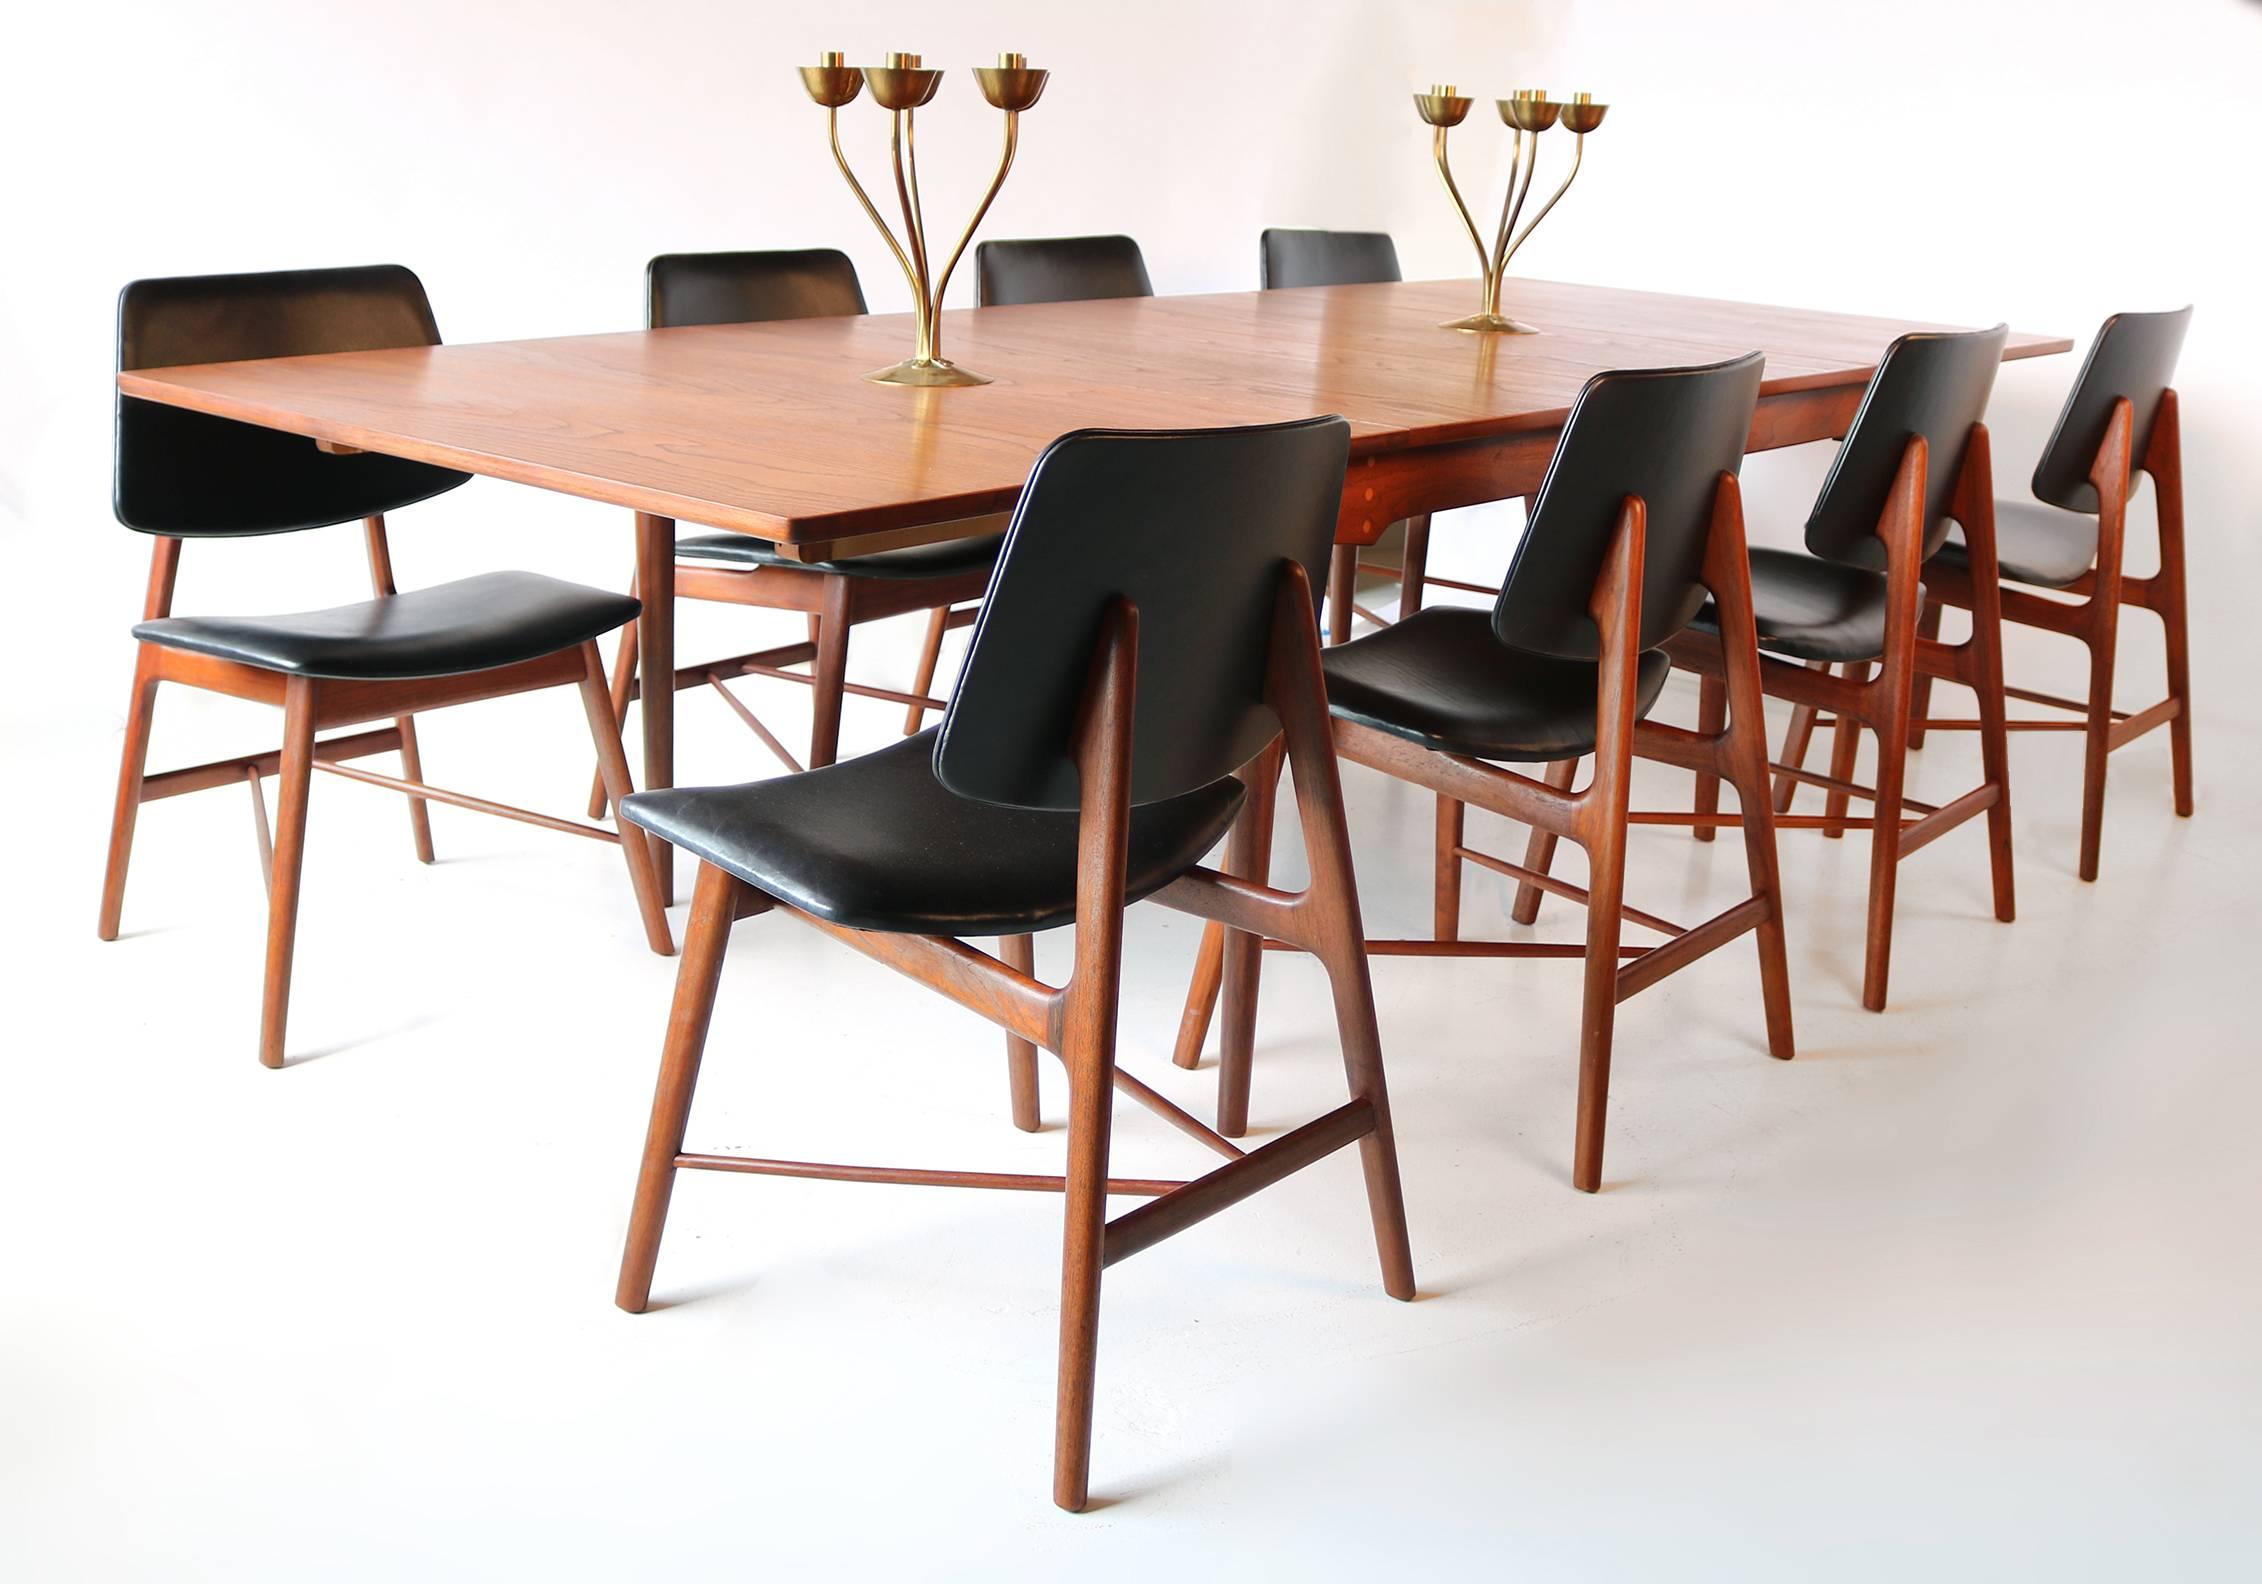 Set of eight Finn Juhl solid teak sculptural dining chairs recovered in a smooth oiled black leather and completely refinished in a waxed teak oil finish. The table measures 43w x 62L x 29